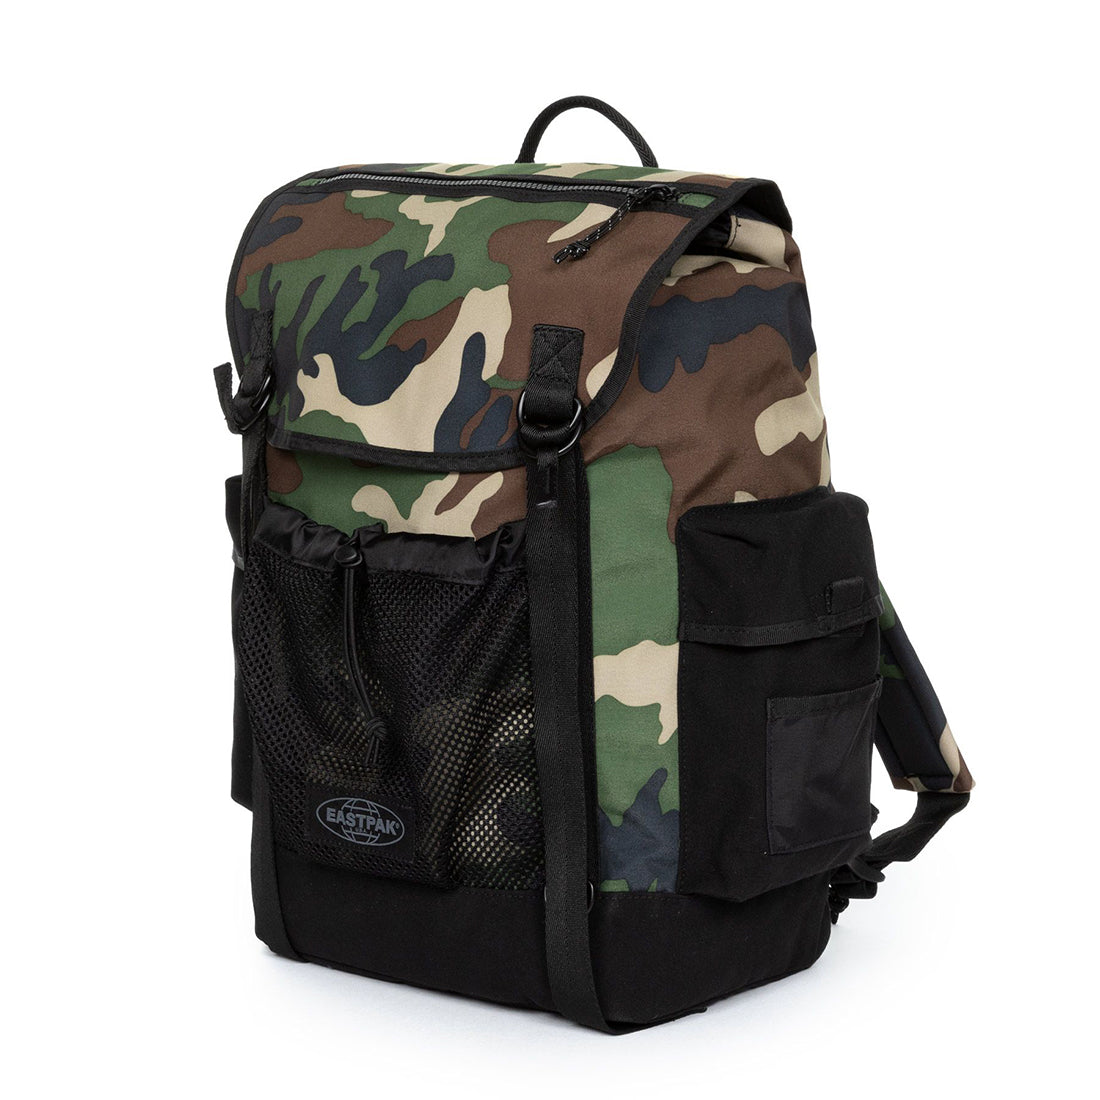 Zaino Unisex Eastpak - Obsten Roothed -Camo